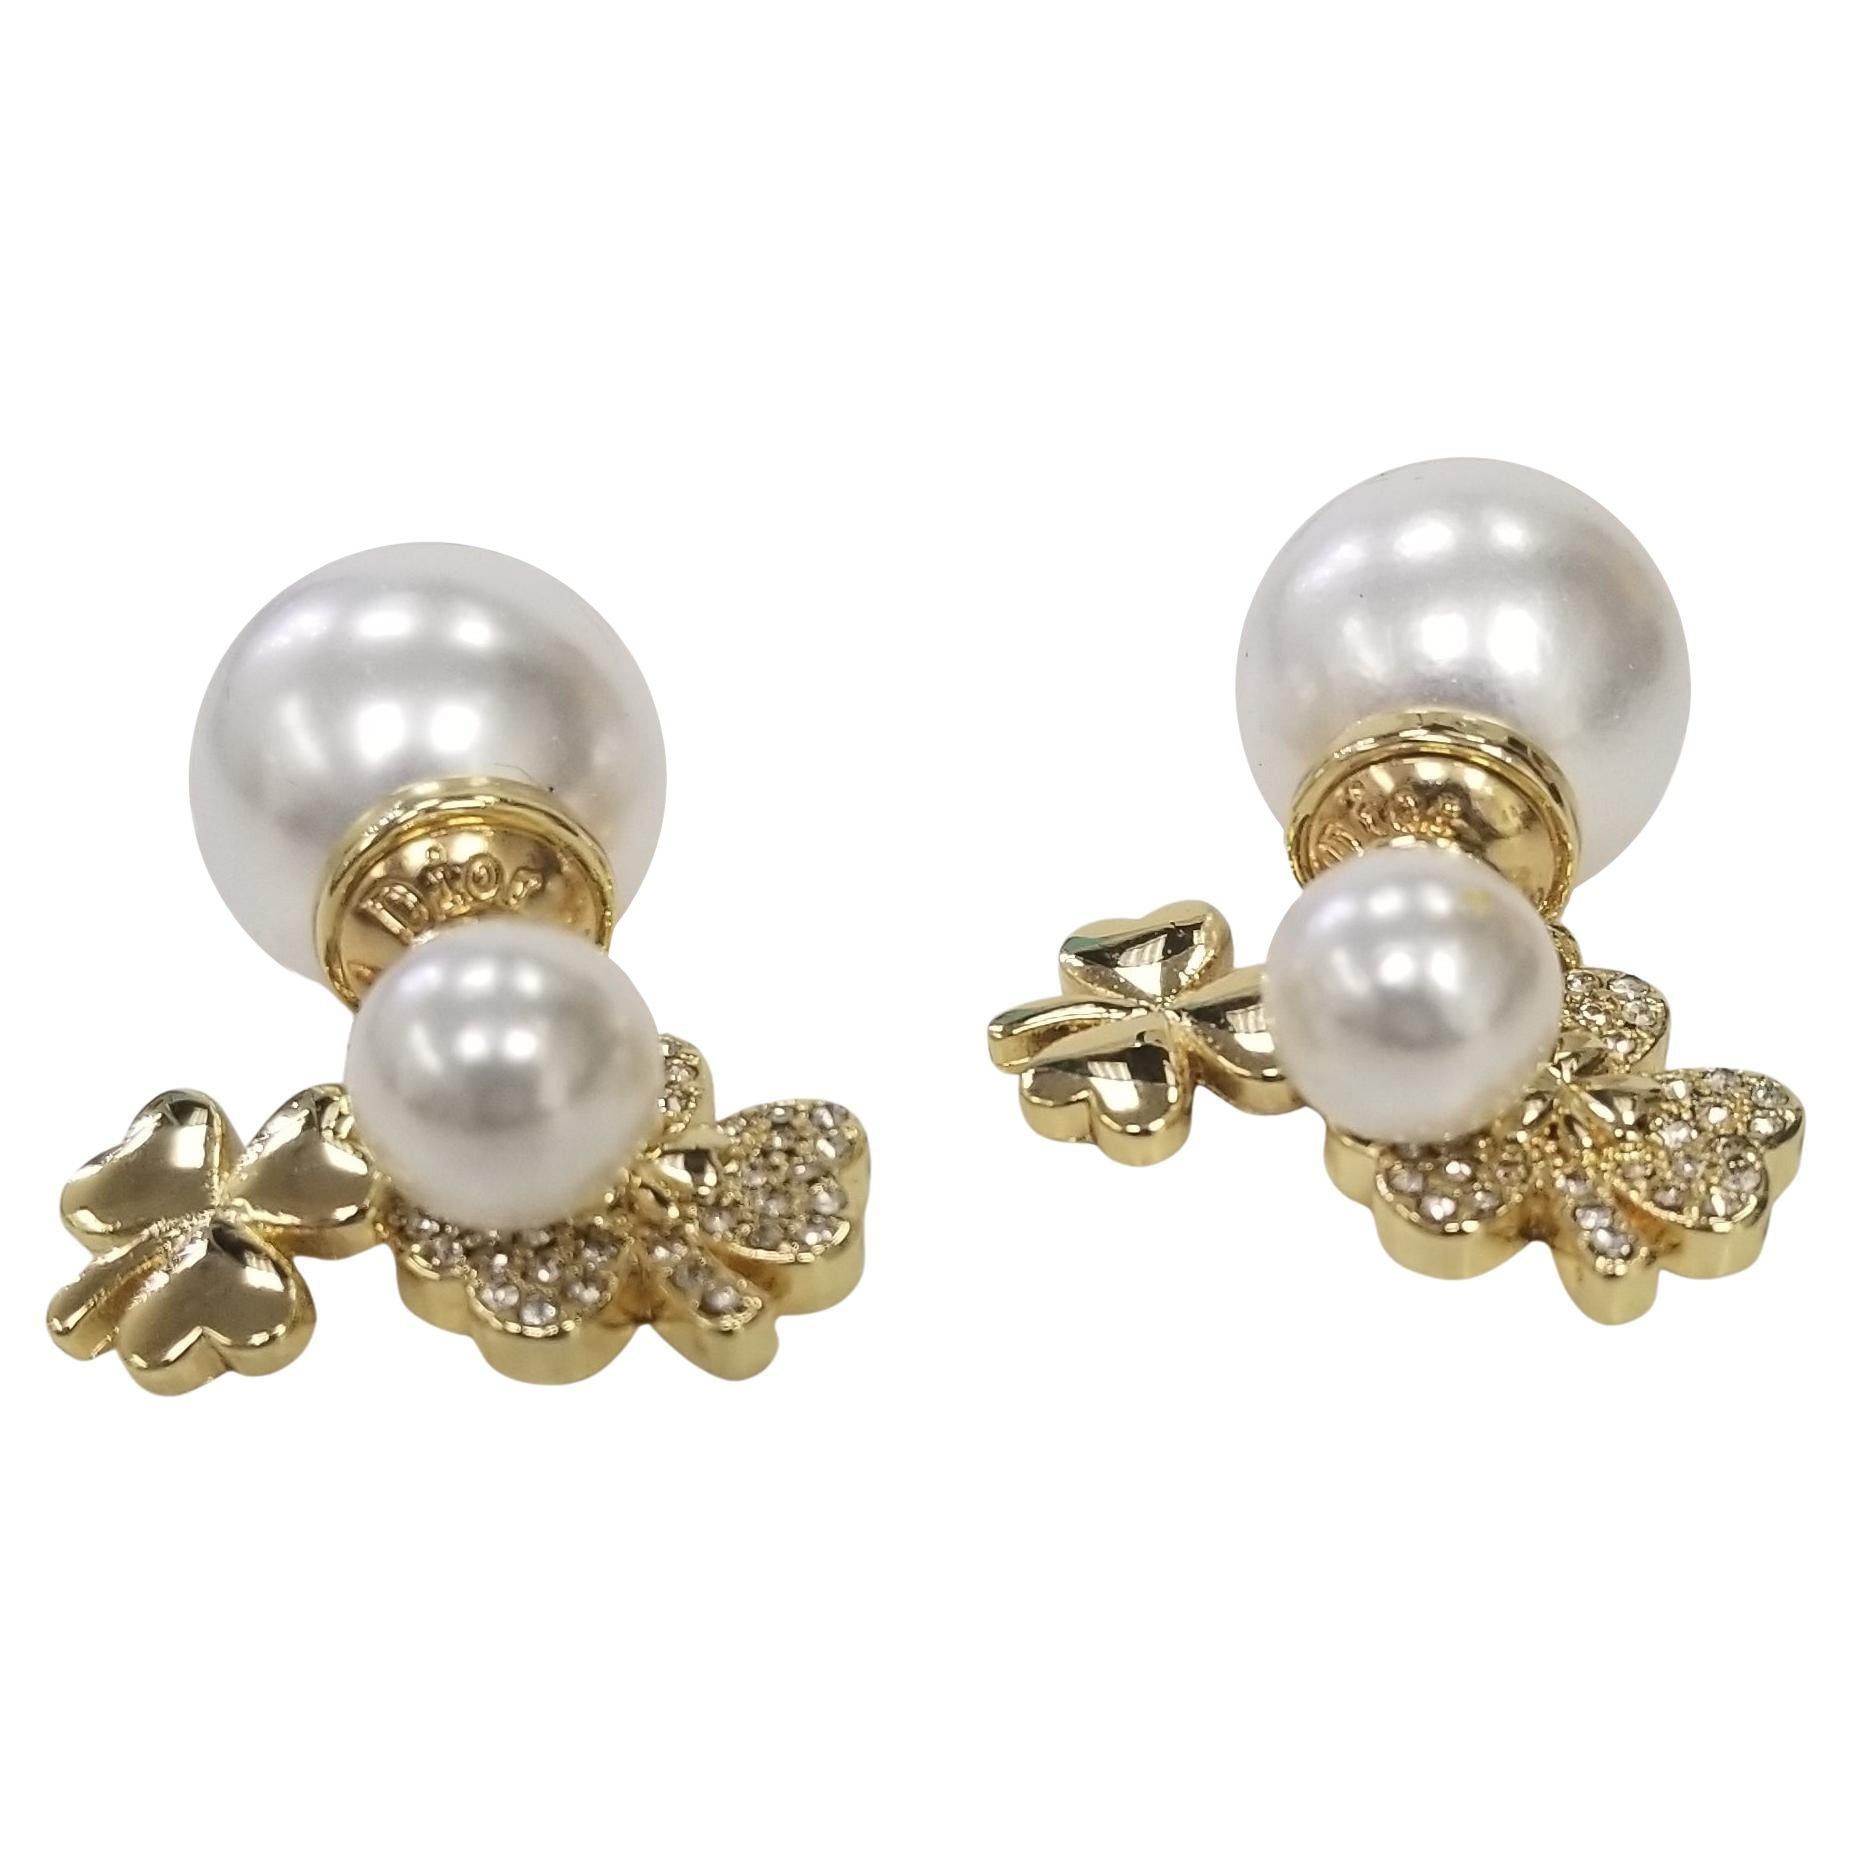 Christian Dior Mise En Dior Tribal Crystal Clover and Faux Pearl Earrings